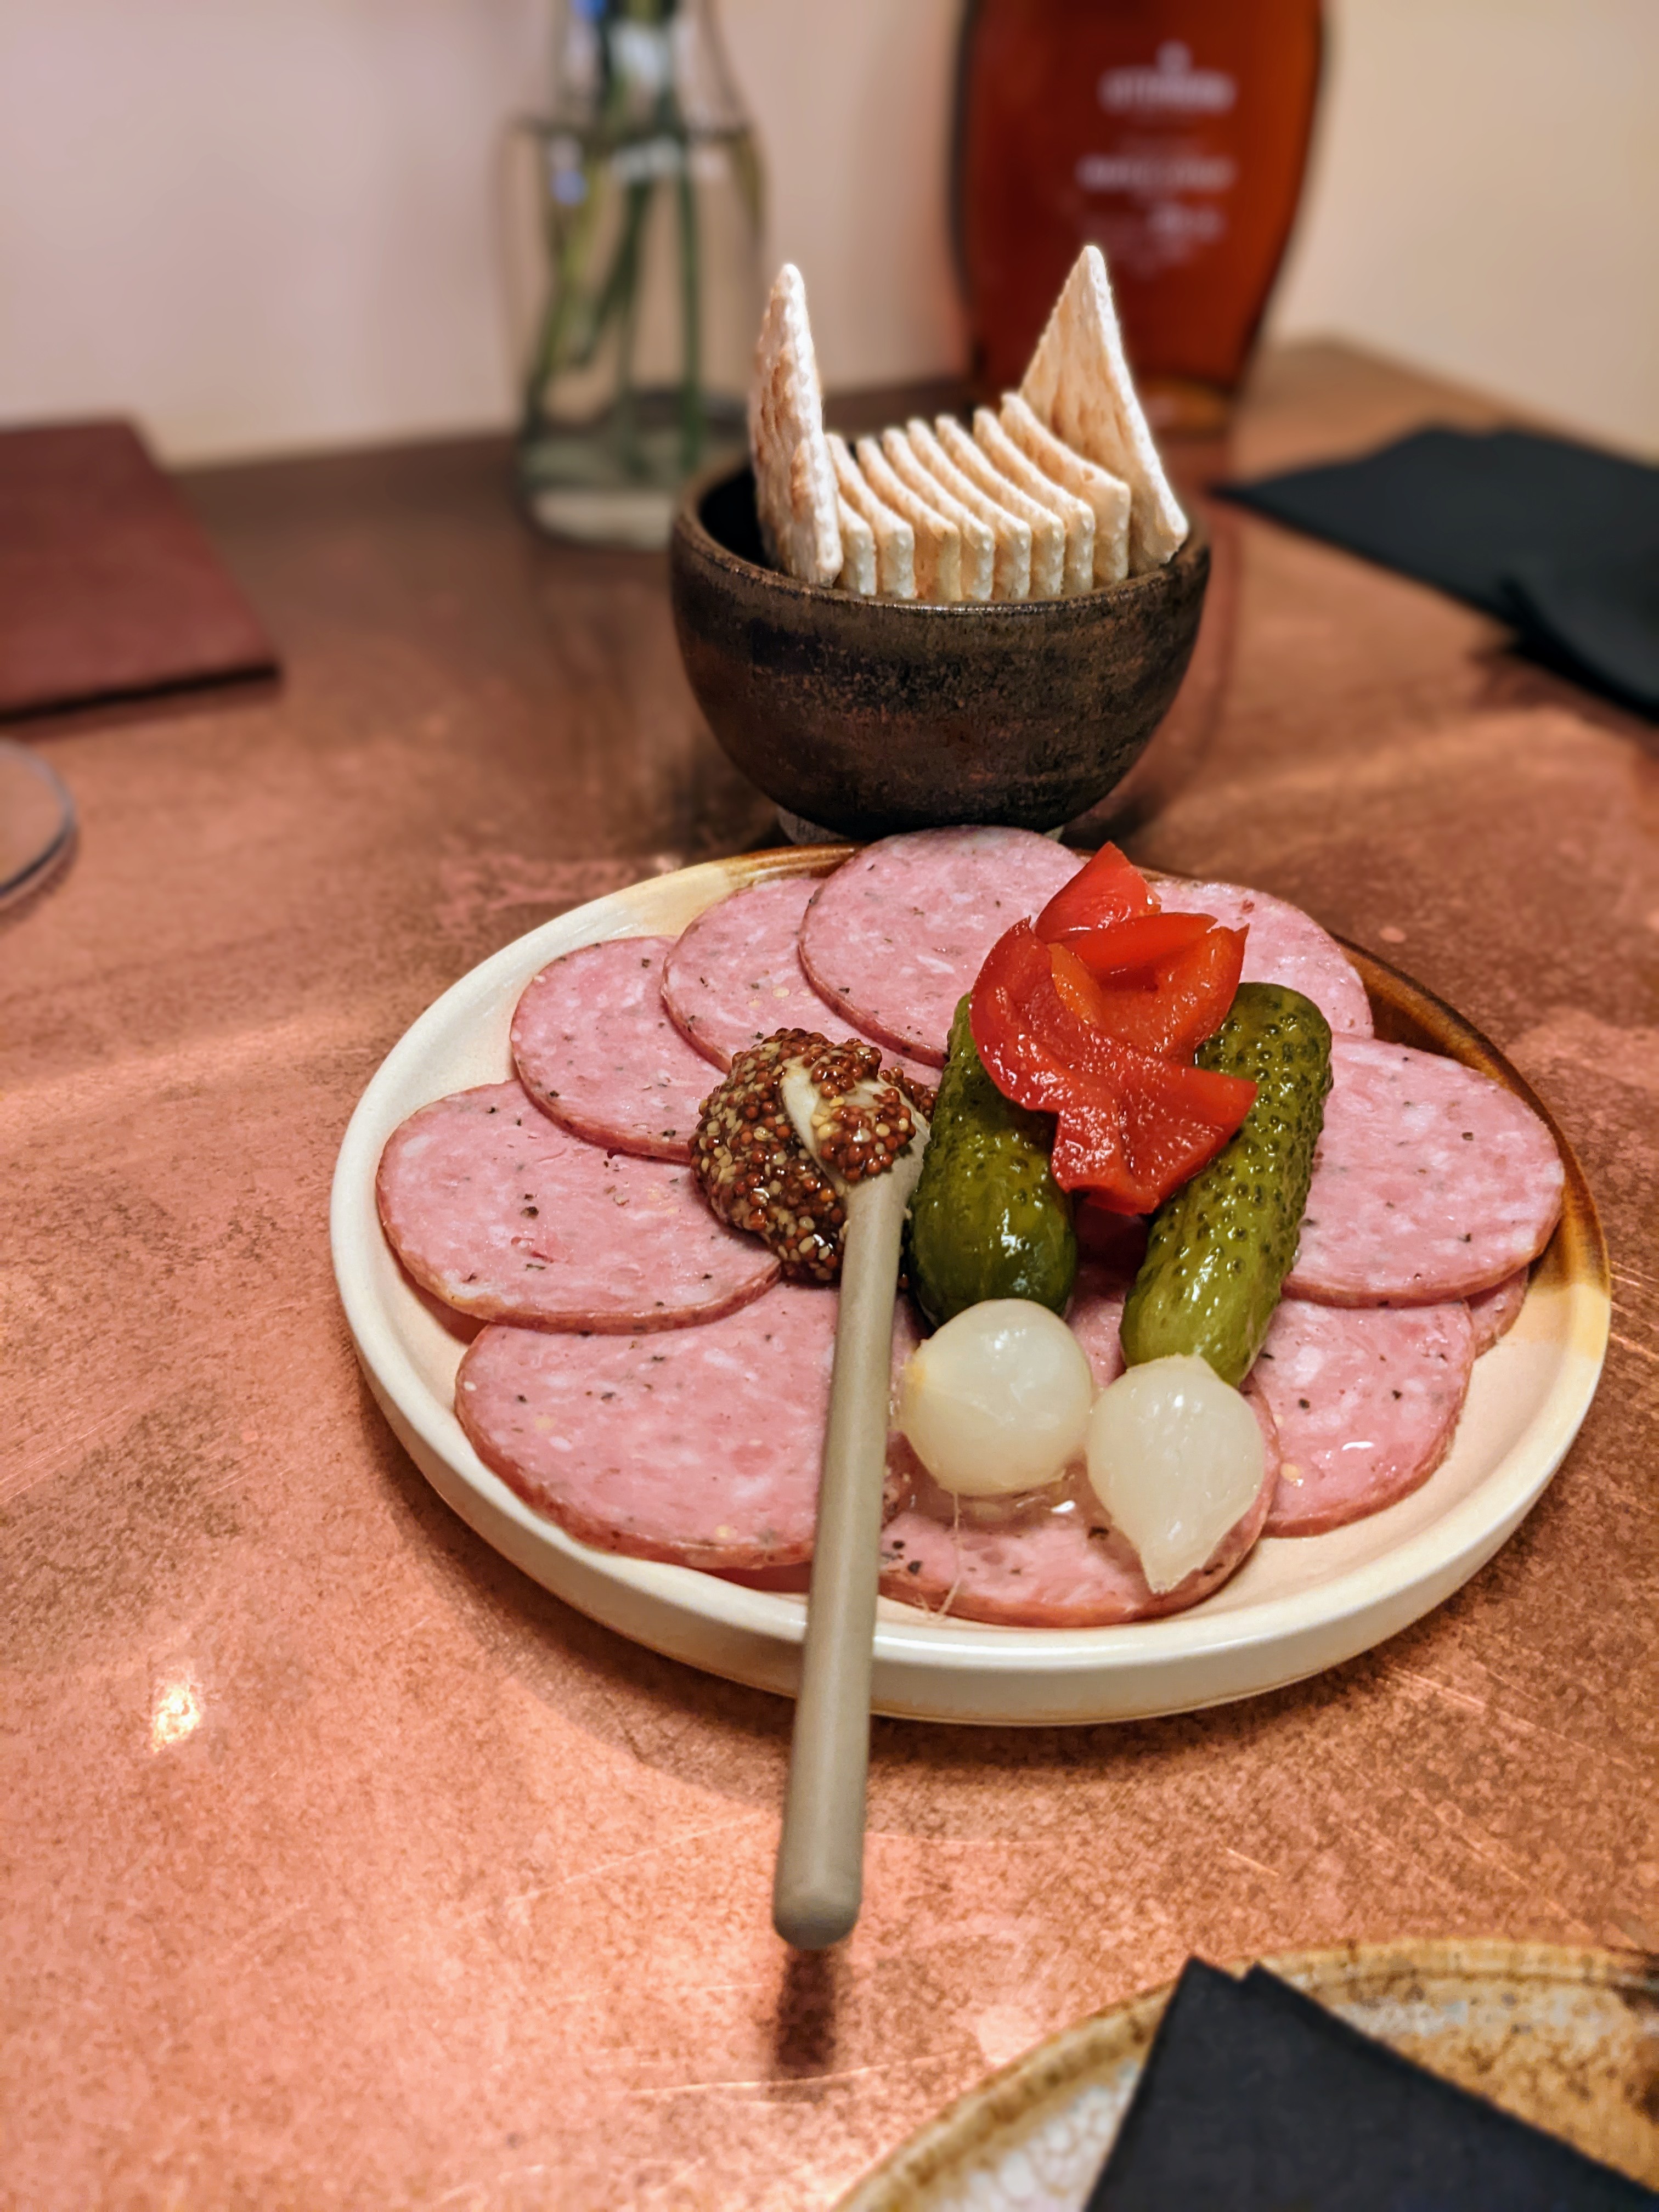 Summer sausage plate with grainy mustard and pickles. Photo by Caitlin Aylmer